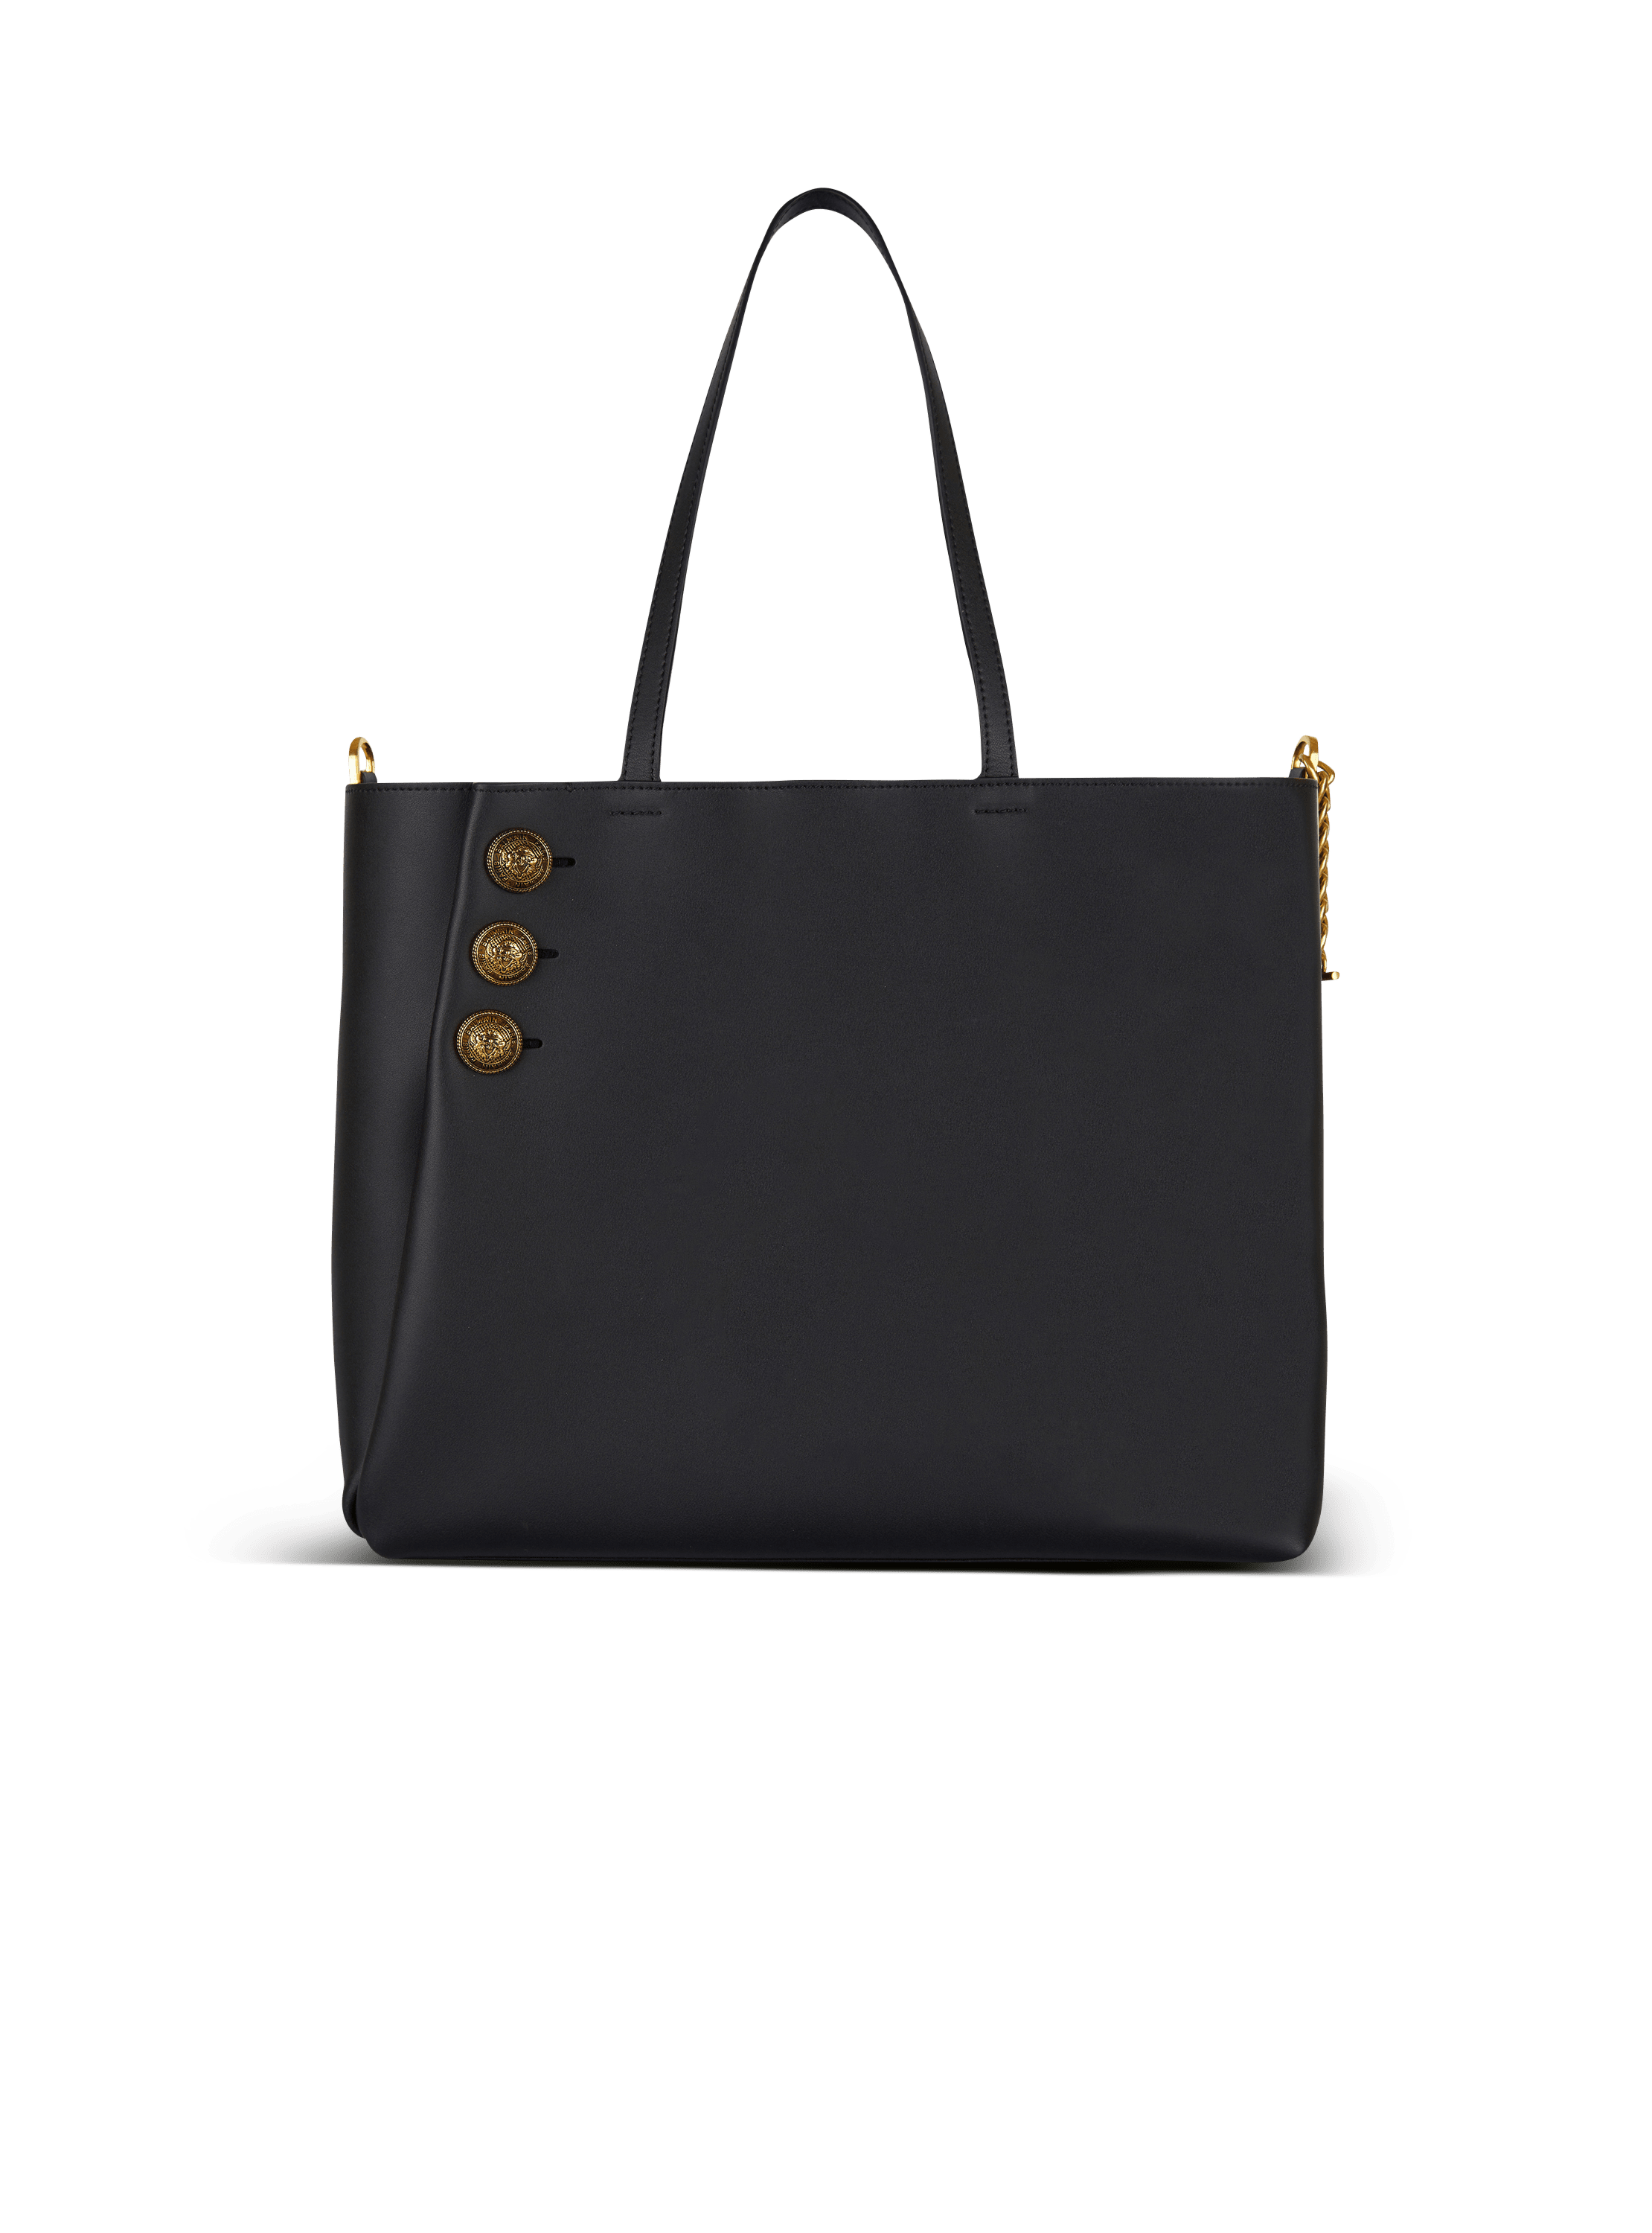 COACH Gallery Tote Bag With Coach Heritage in Black